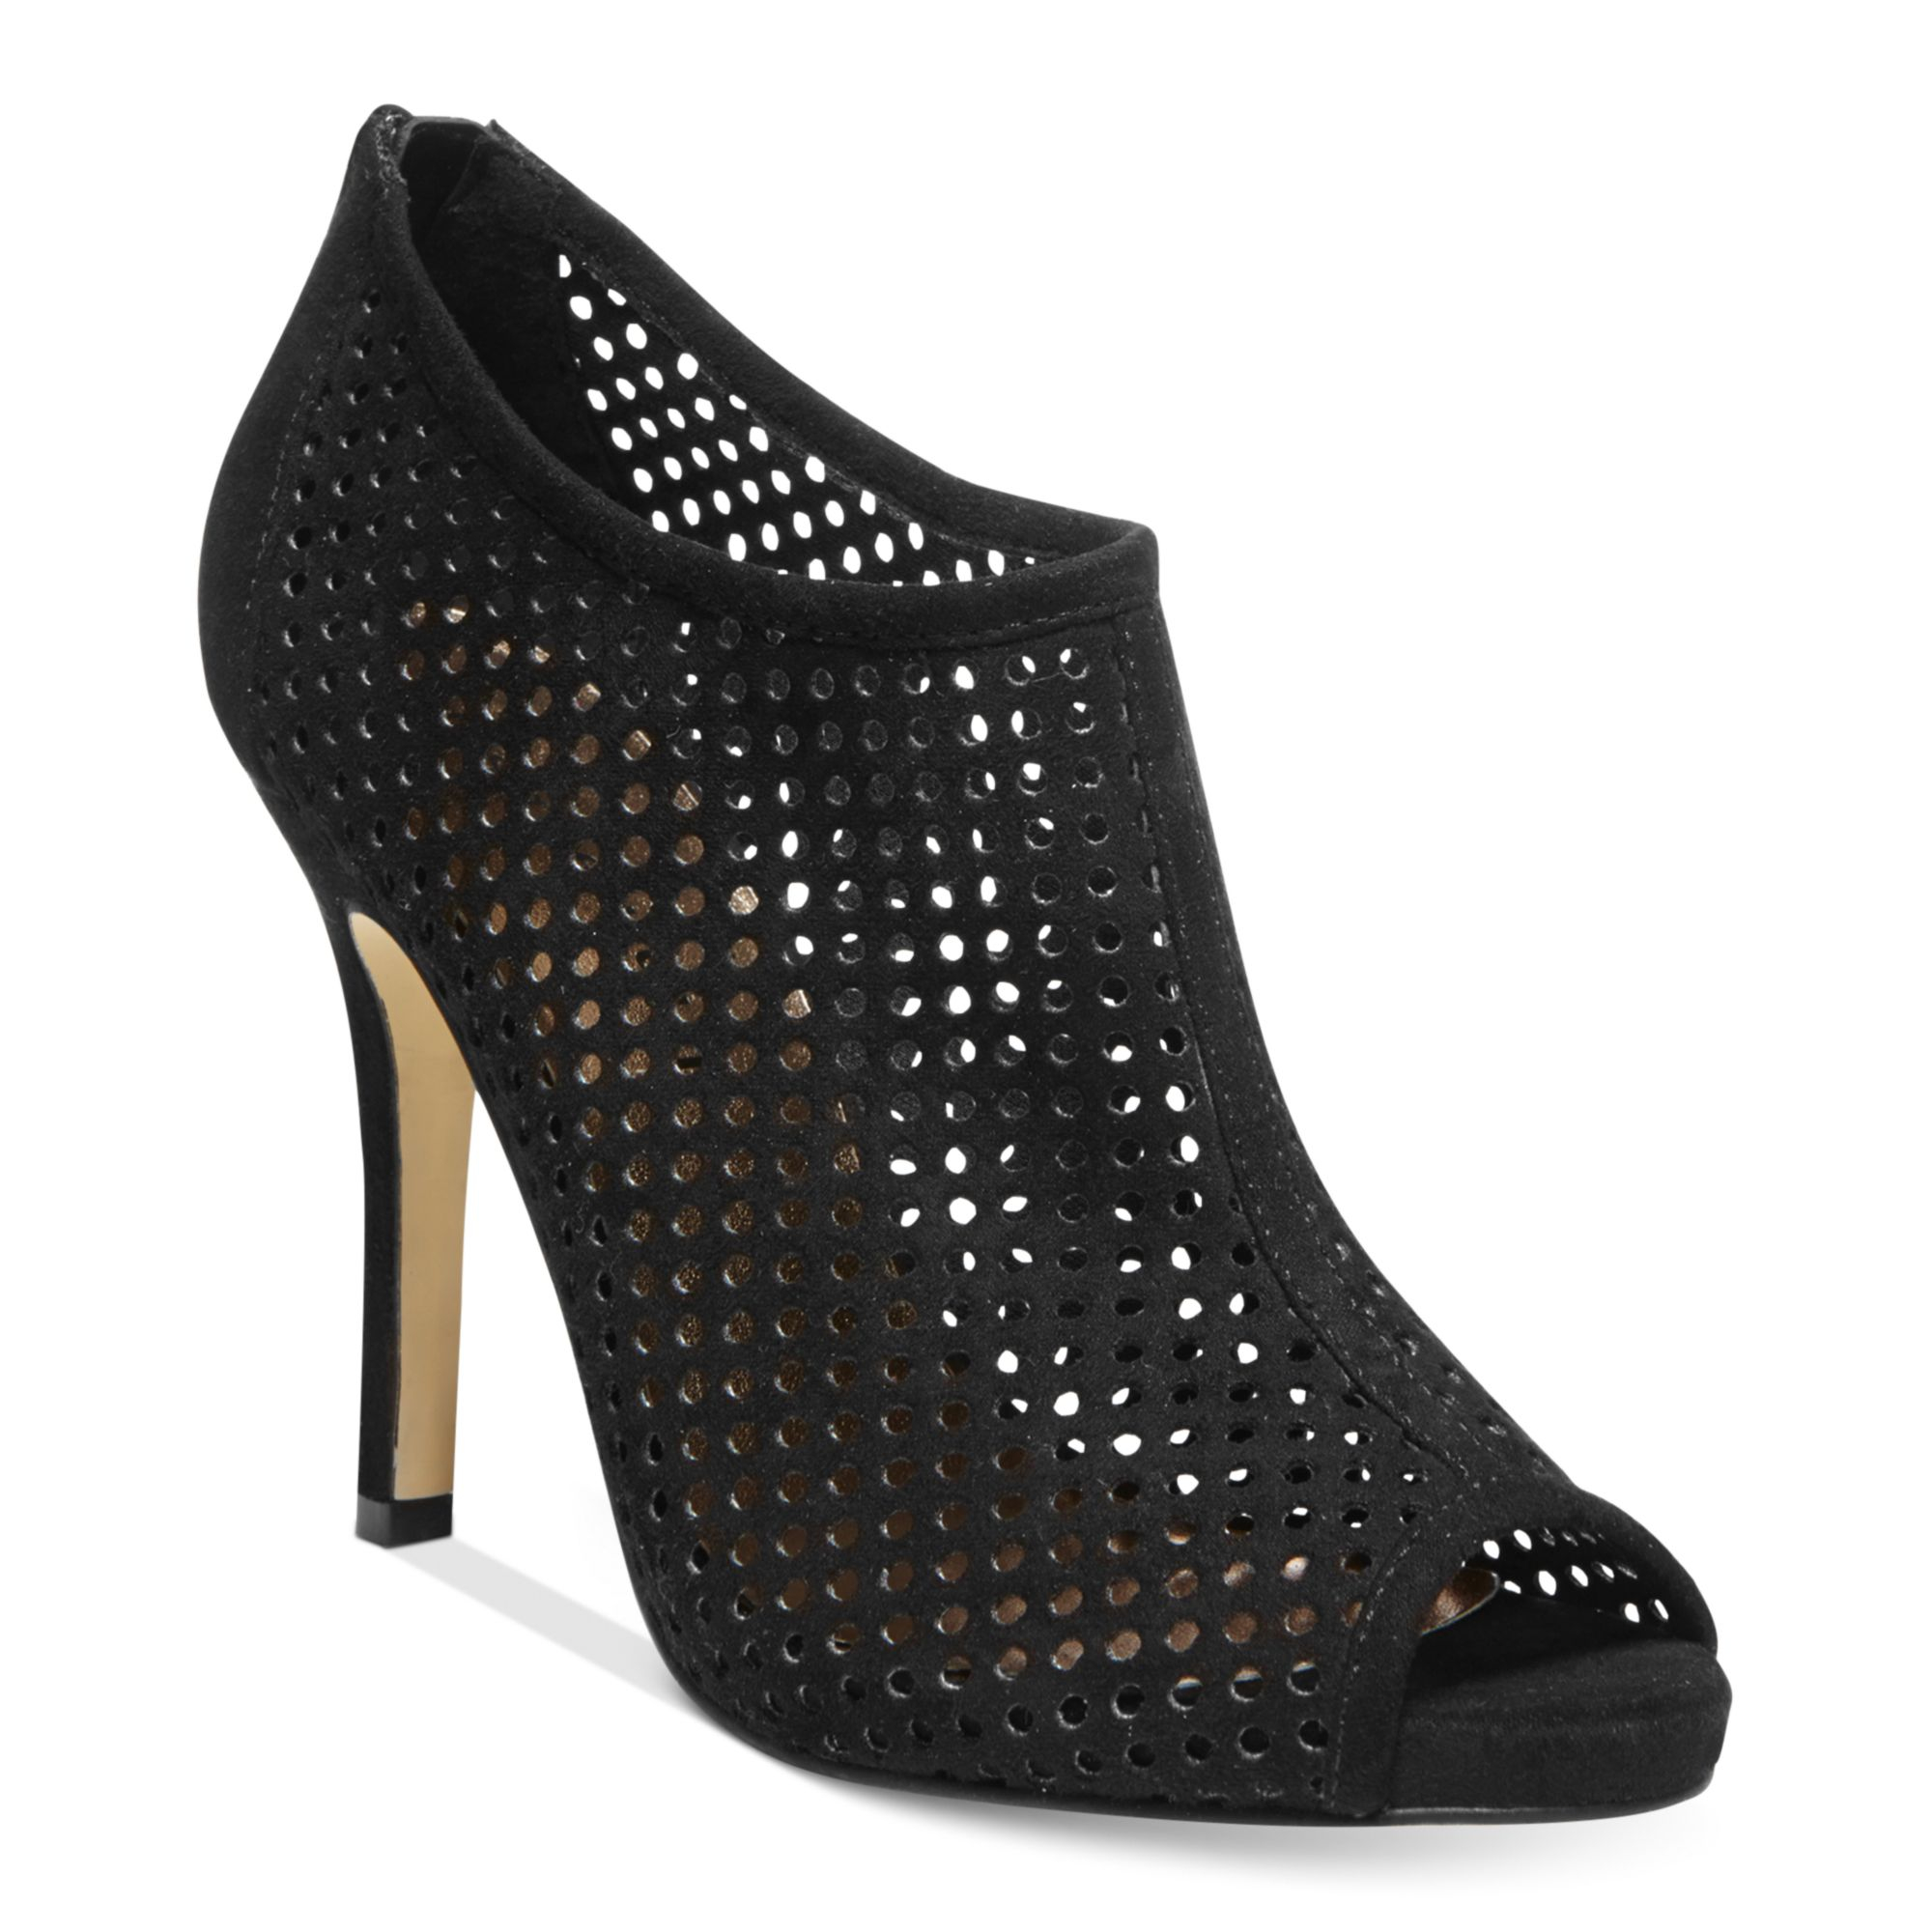 Lyst - Madden Girl Renzo Perforated Shooties in Black